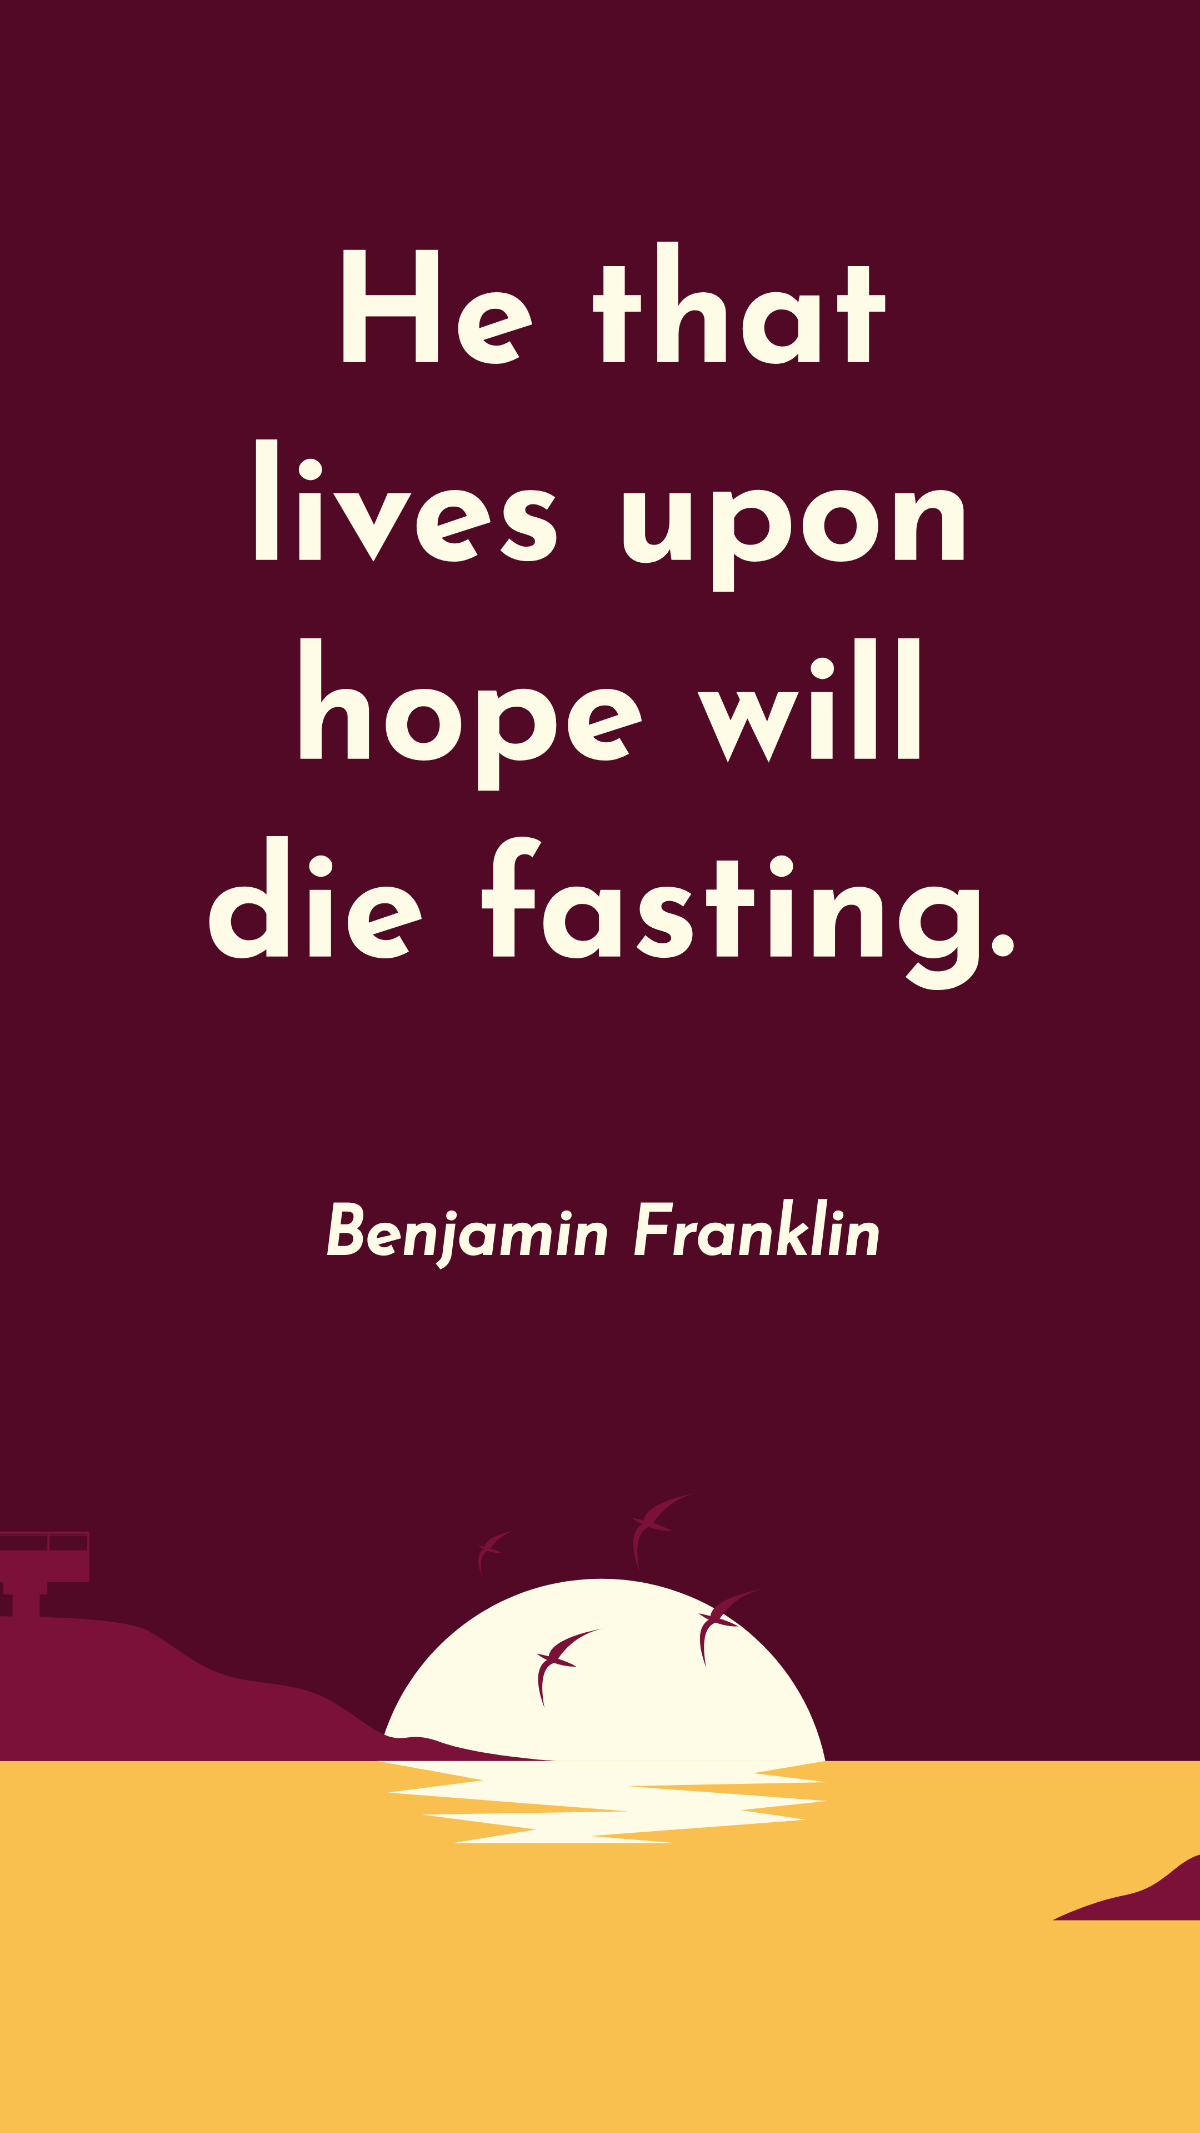 Benjamin Franklin - He that lives upon hope will die fasting.